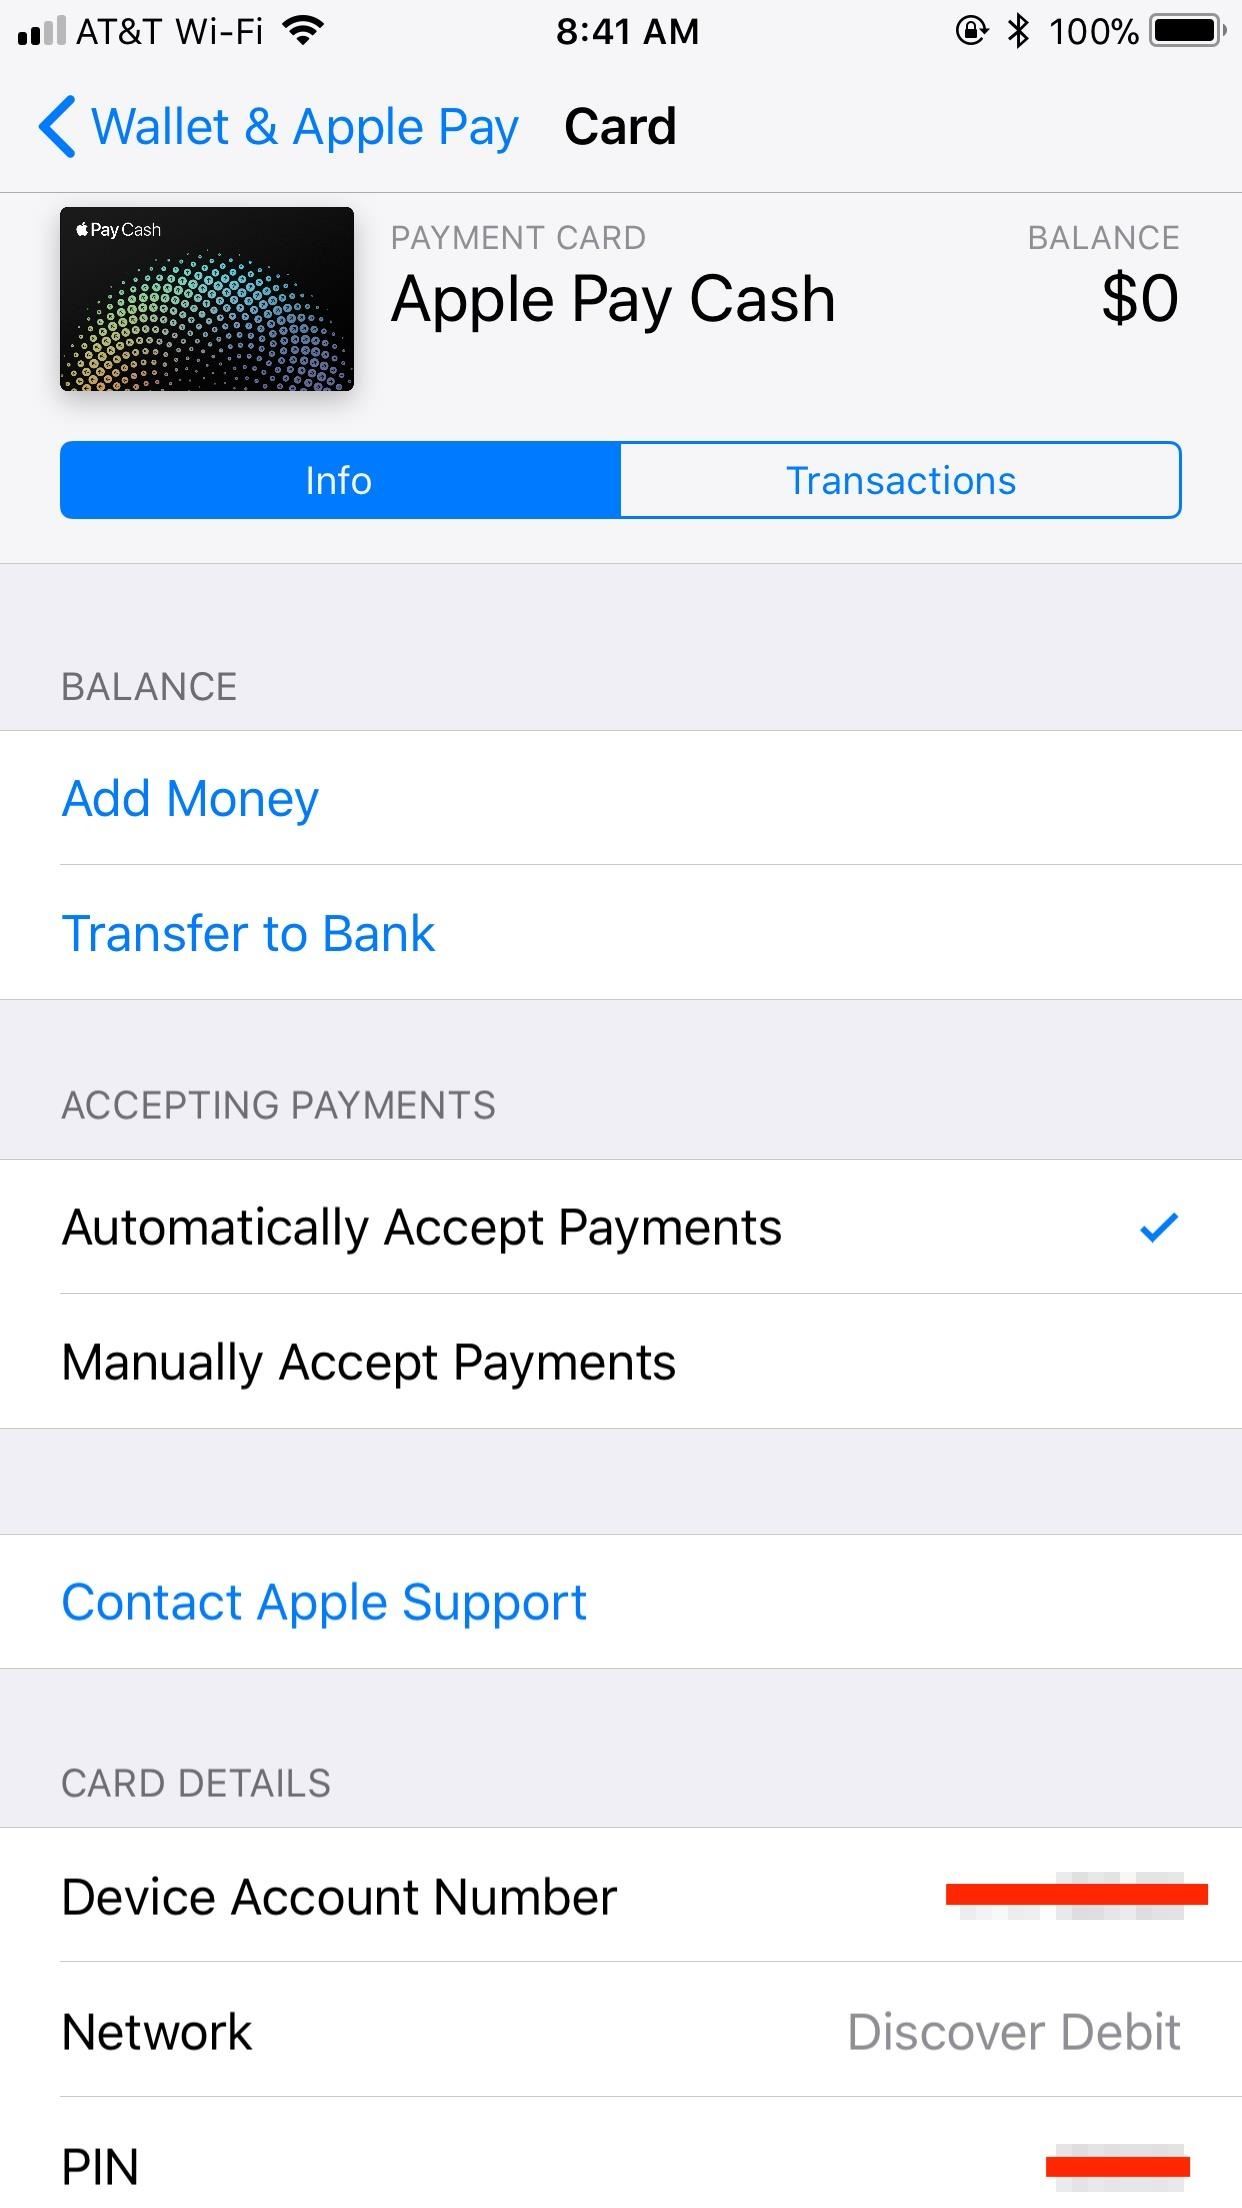 Apple Pay Cash 101: How to Add Money to Your Card Balance